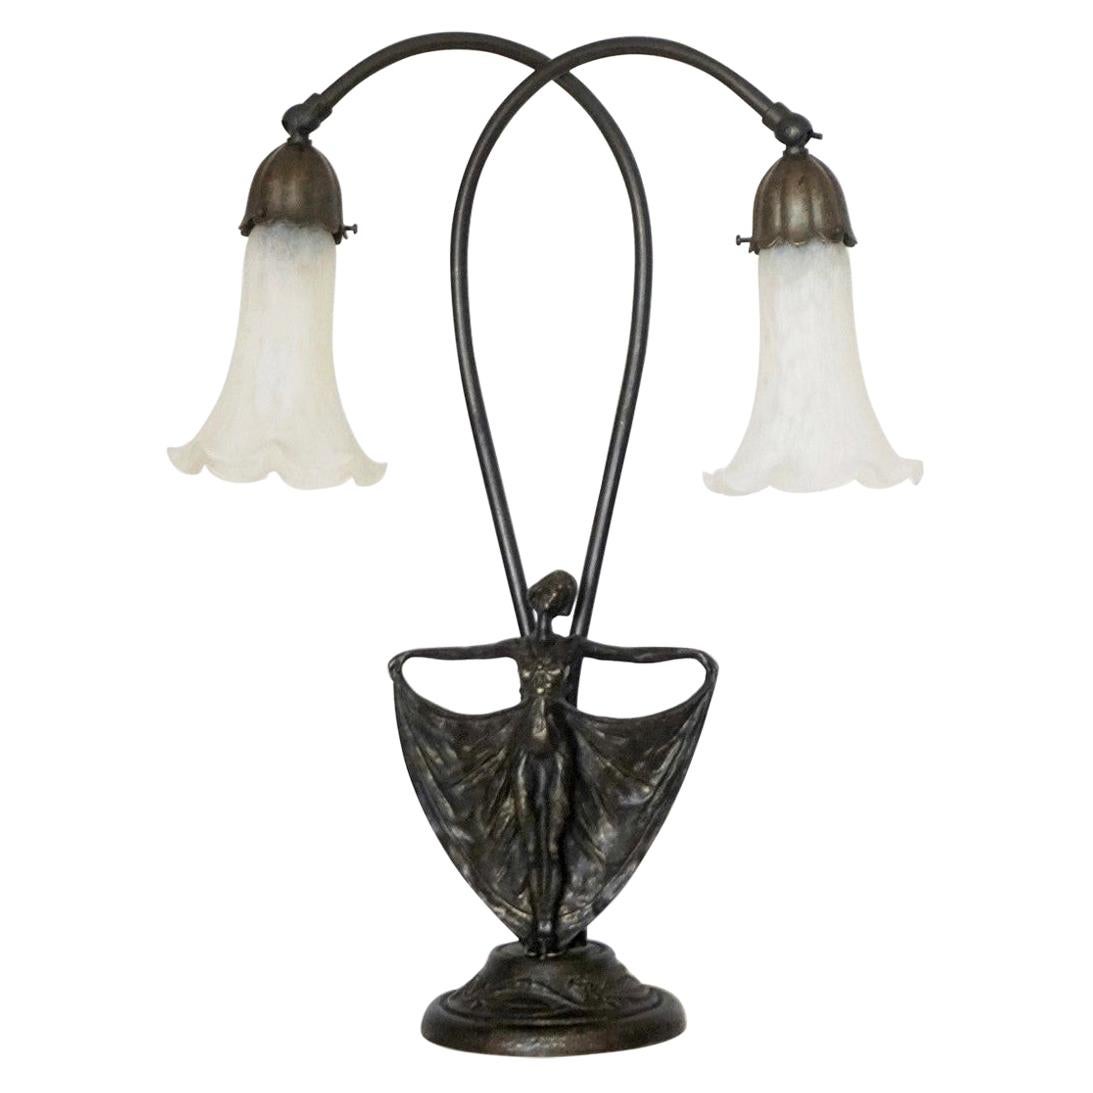 French Art Deco Bronze Figurine Articulated Double Arm Table Lamp, 1930-1939